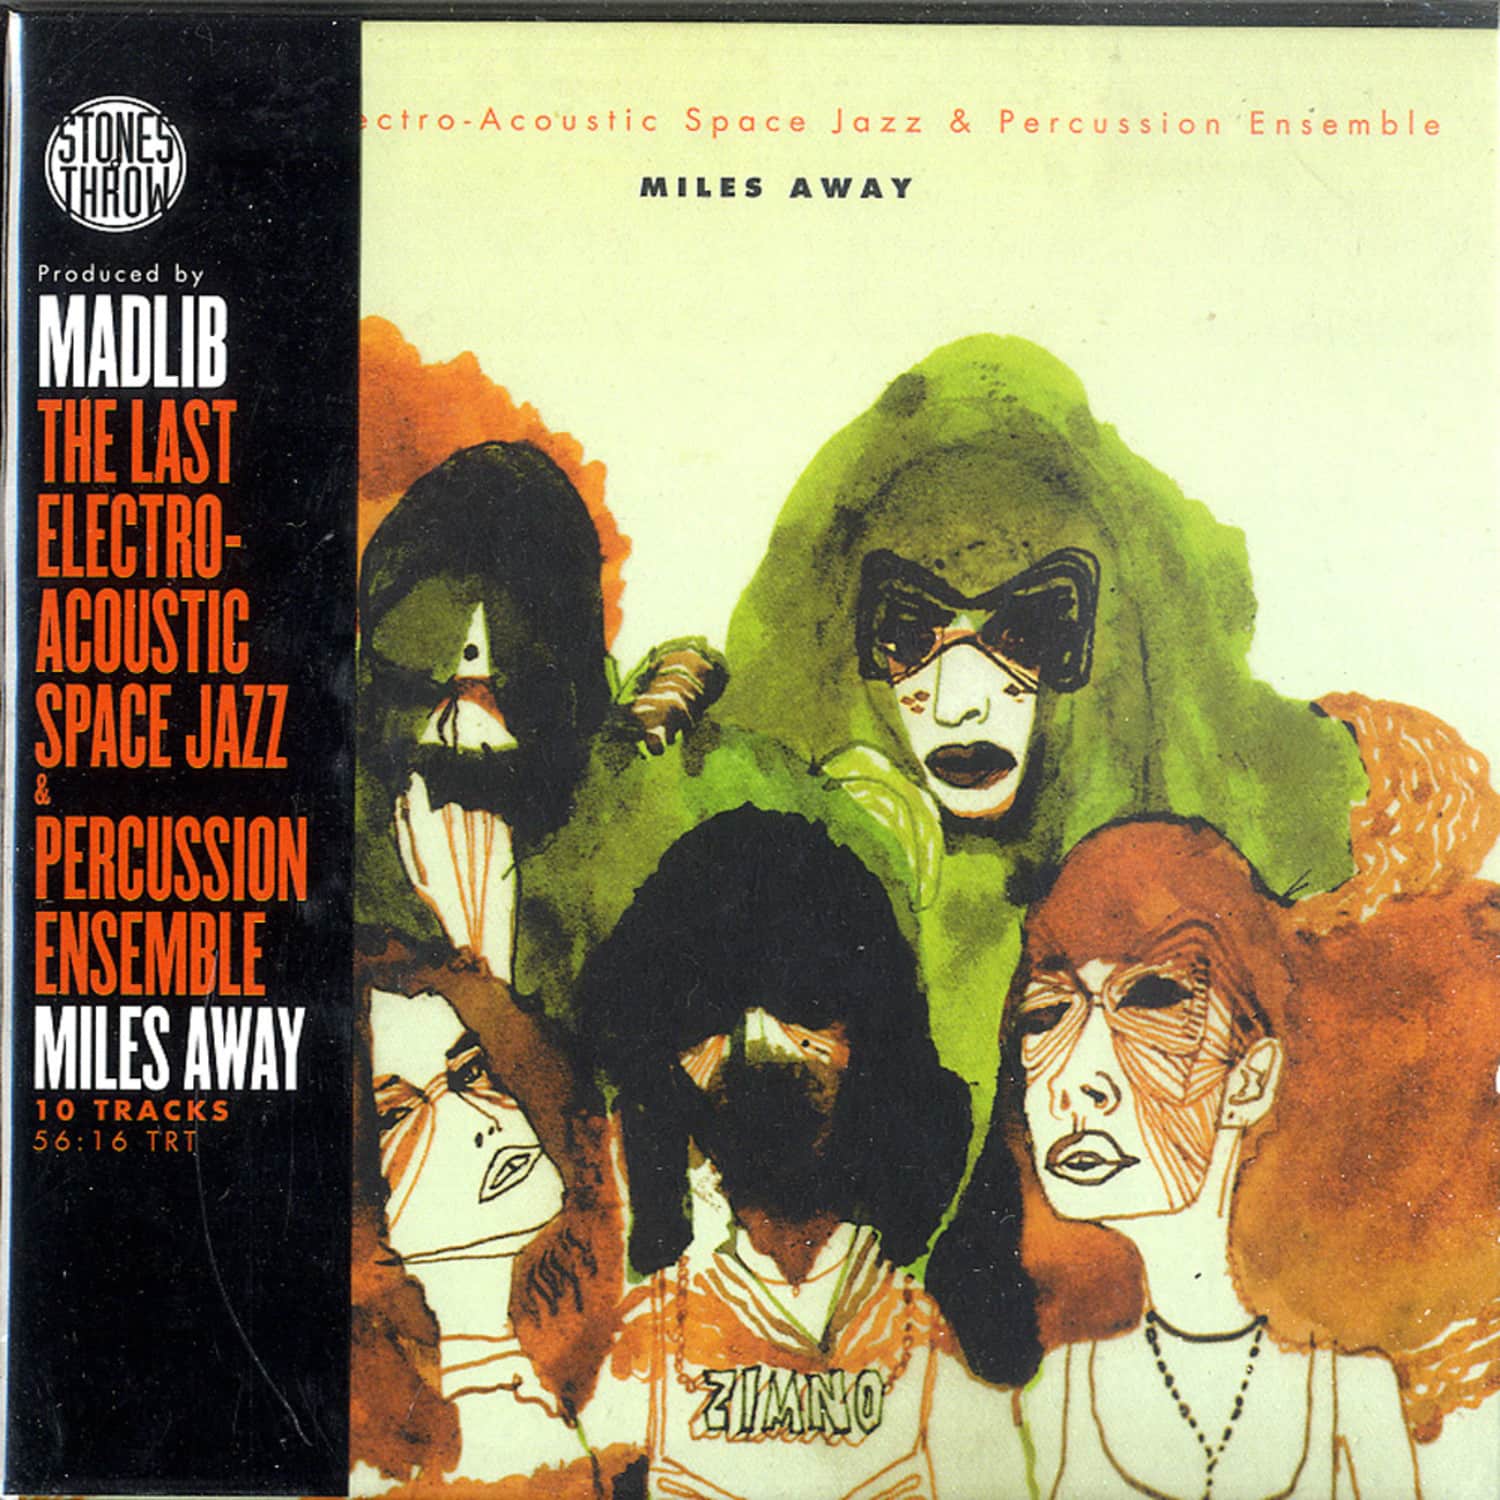 The Last Electro-Acoustic Space Jazz & Percussion Ensemble - MILES AWAY 